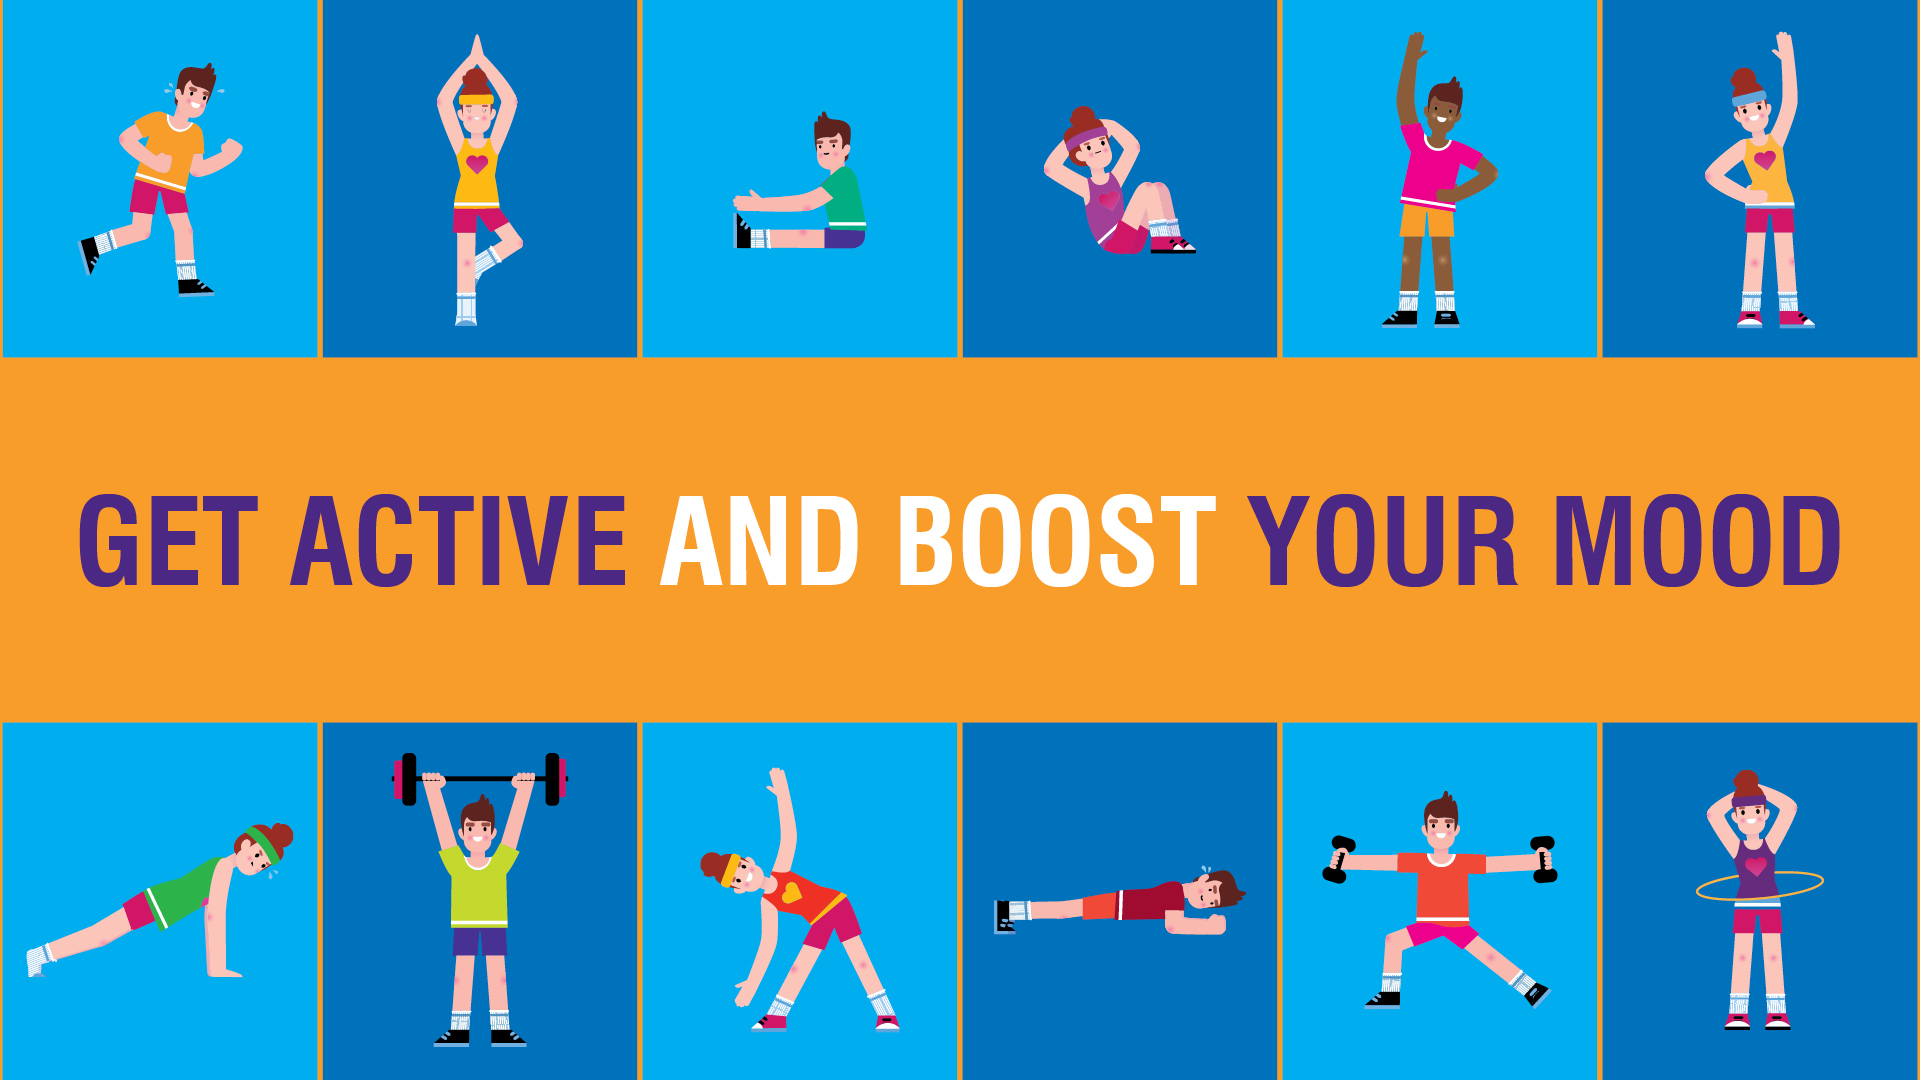 Get Active and Boost your mood